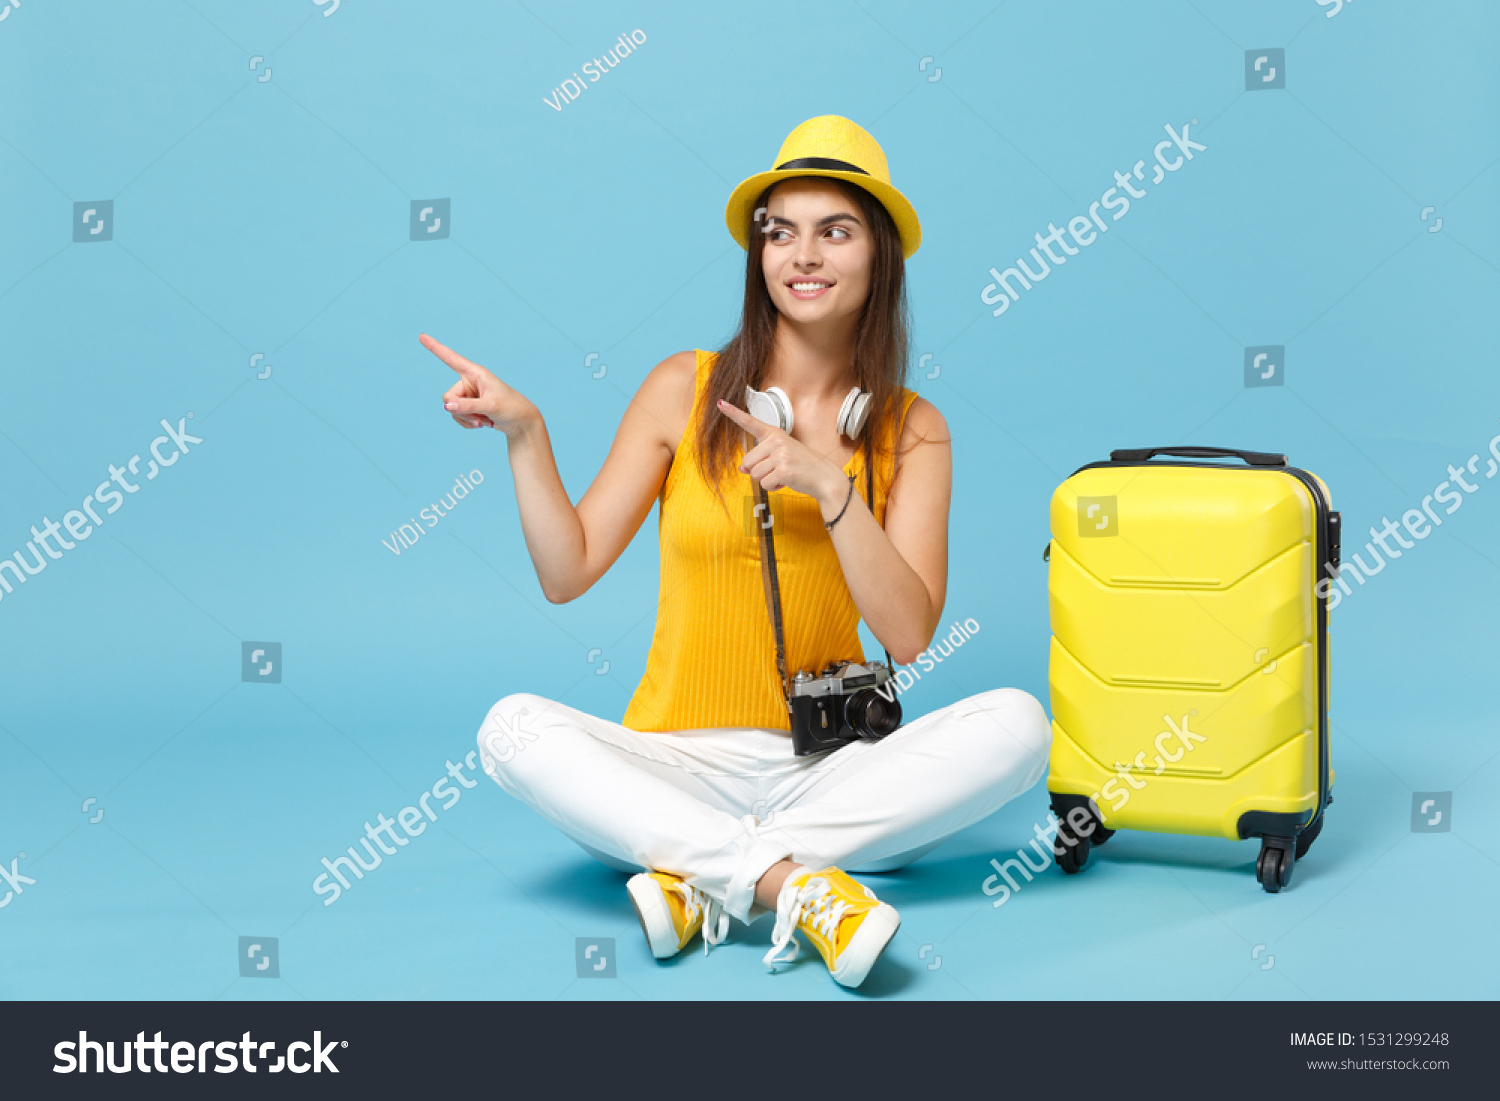 Traveler tourist woman in yellow casual clothes hat with suitcase photo camera isolated on blue background. Female passenger traveling abroad to travel on weekends getaway. Air flight journey concept #1531299248